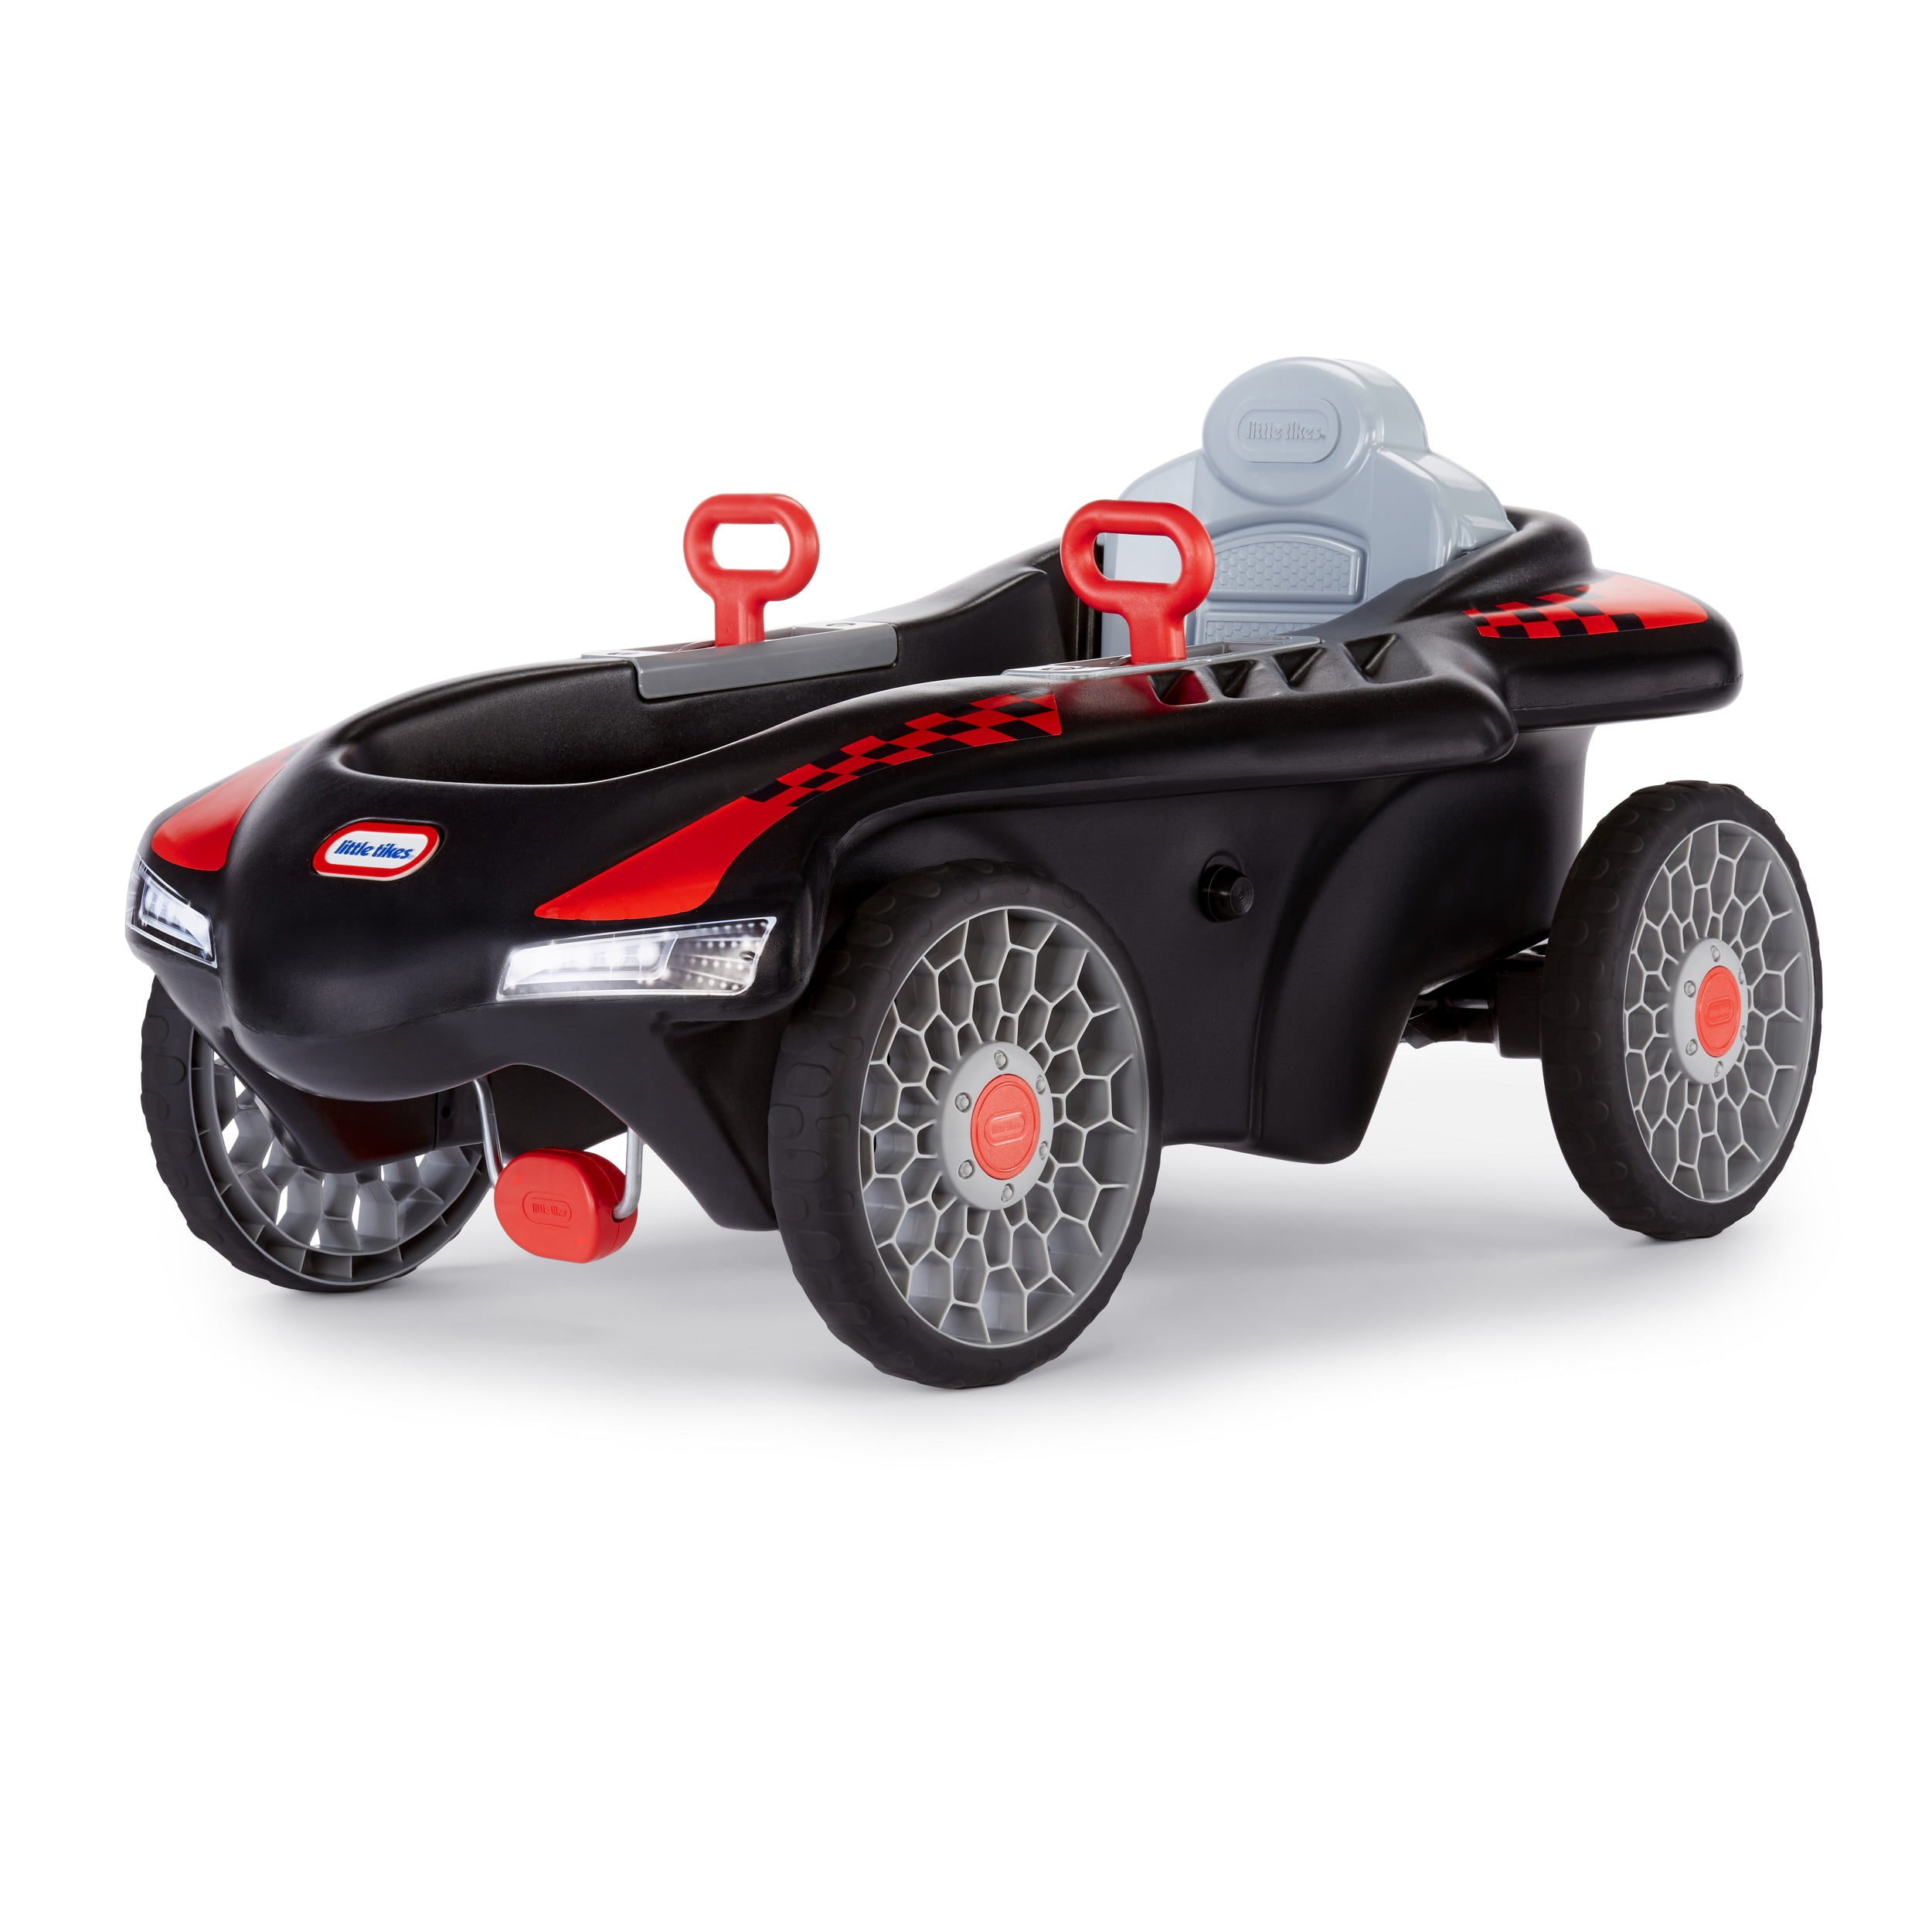 Little Tikes Jett Car Racer Ride-on Pedal Car in Black and Red, Adjustable  Seat Back, Dual Handle Rear Wheel Steering - For Kids Boys Girls Ages 3 to  7 Years Old - Walmart.com